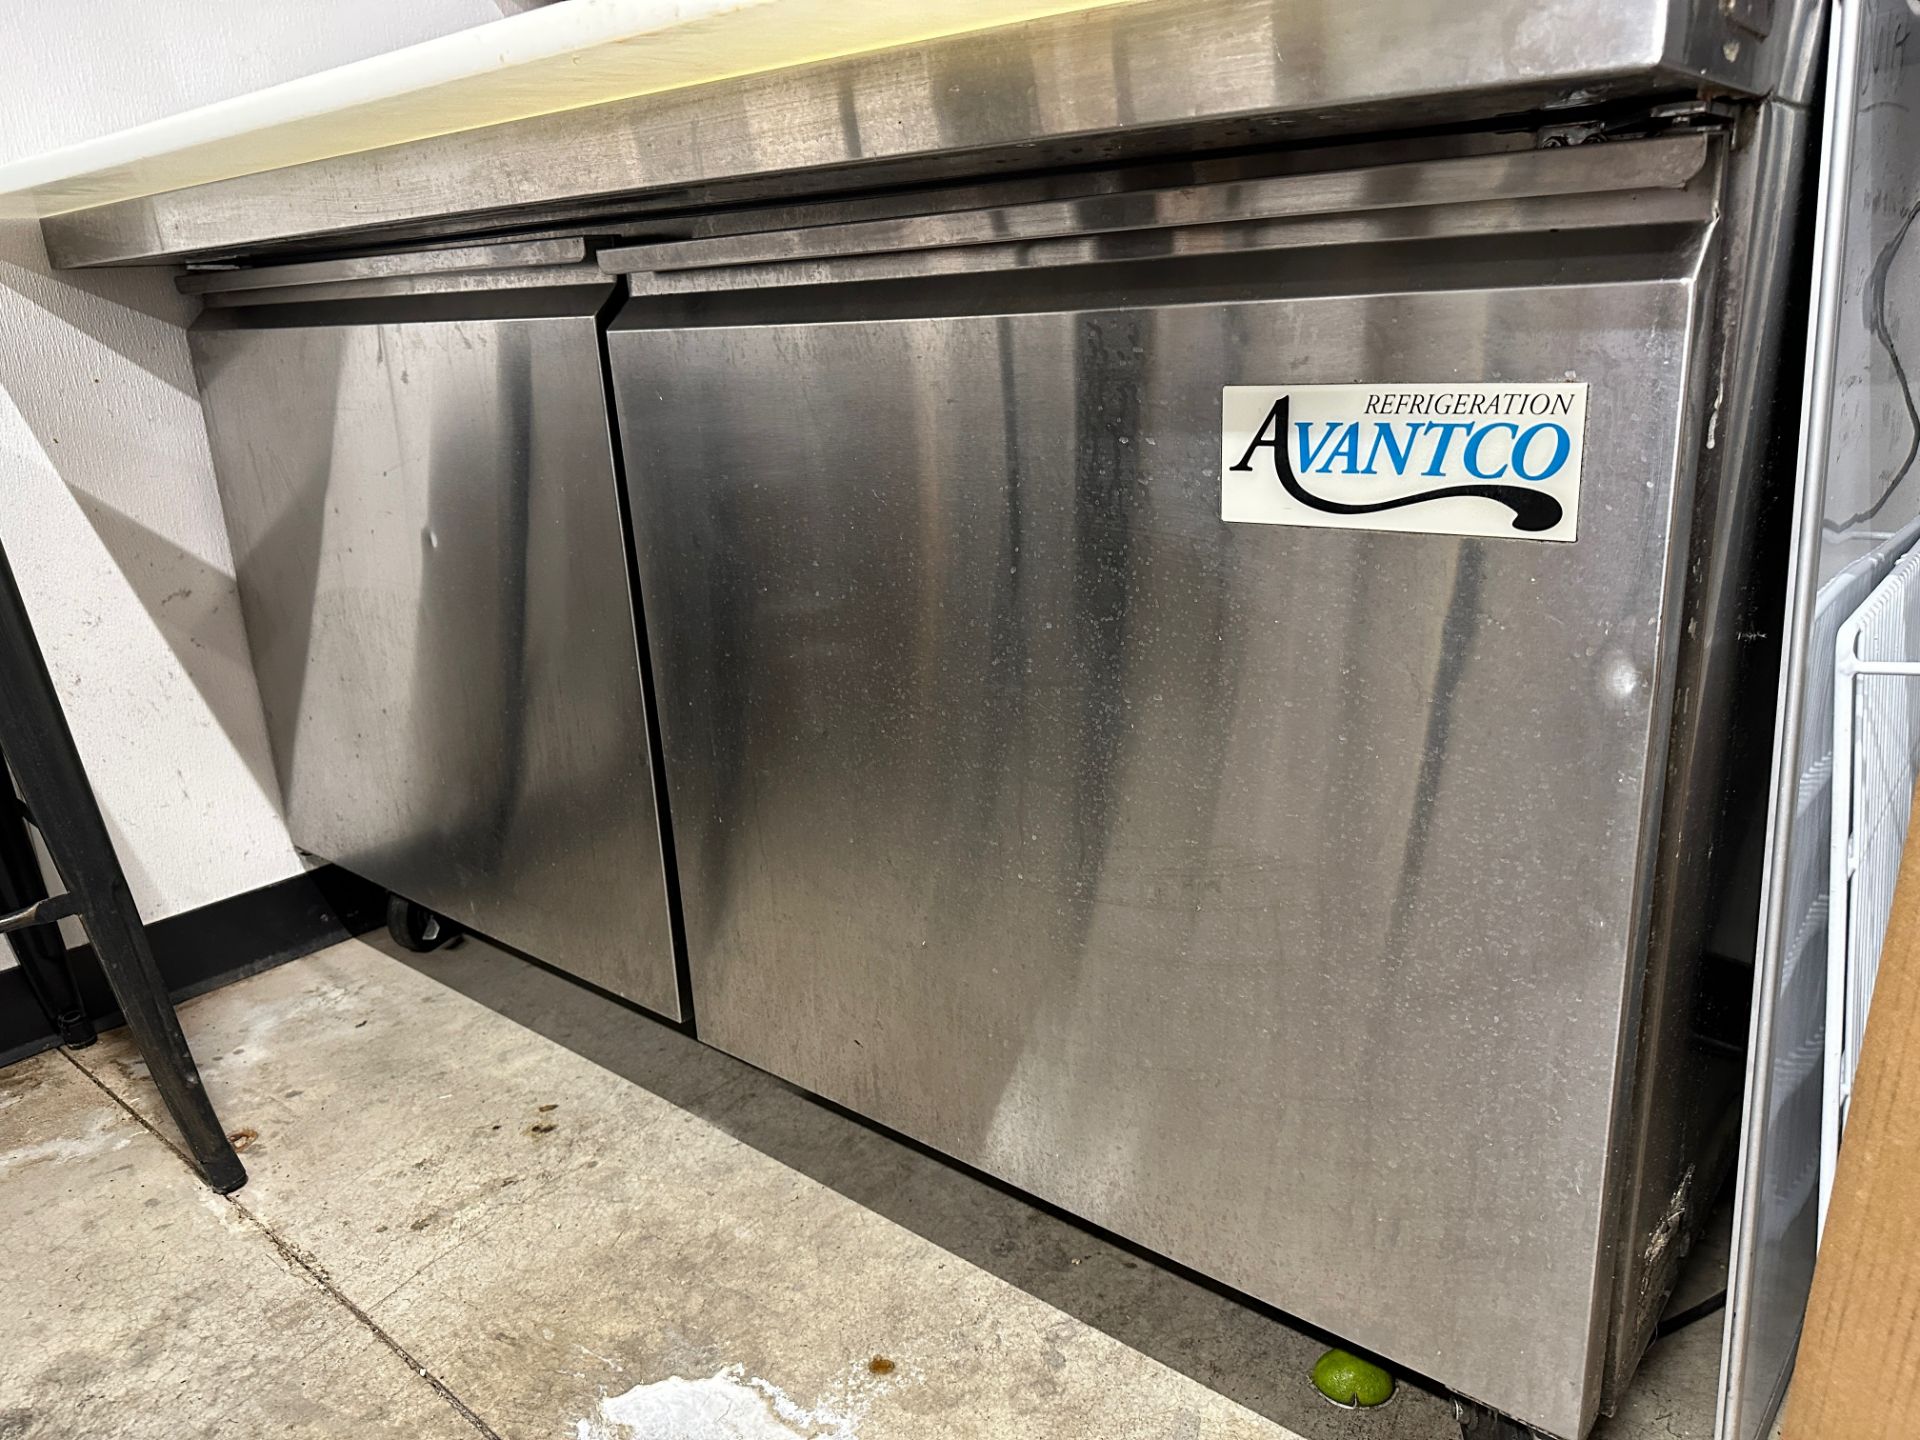 Avantco Bain Marie Cooler - Model 178SSPT60M (Approx. 40" with Cutting Board x 5' W | Rig Fee $95 - Image 3 of 5